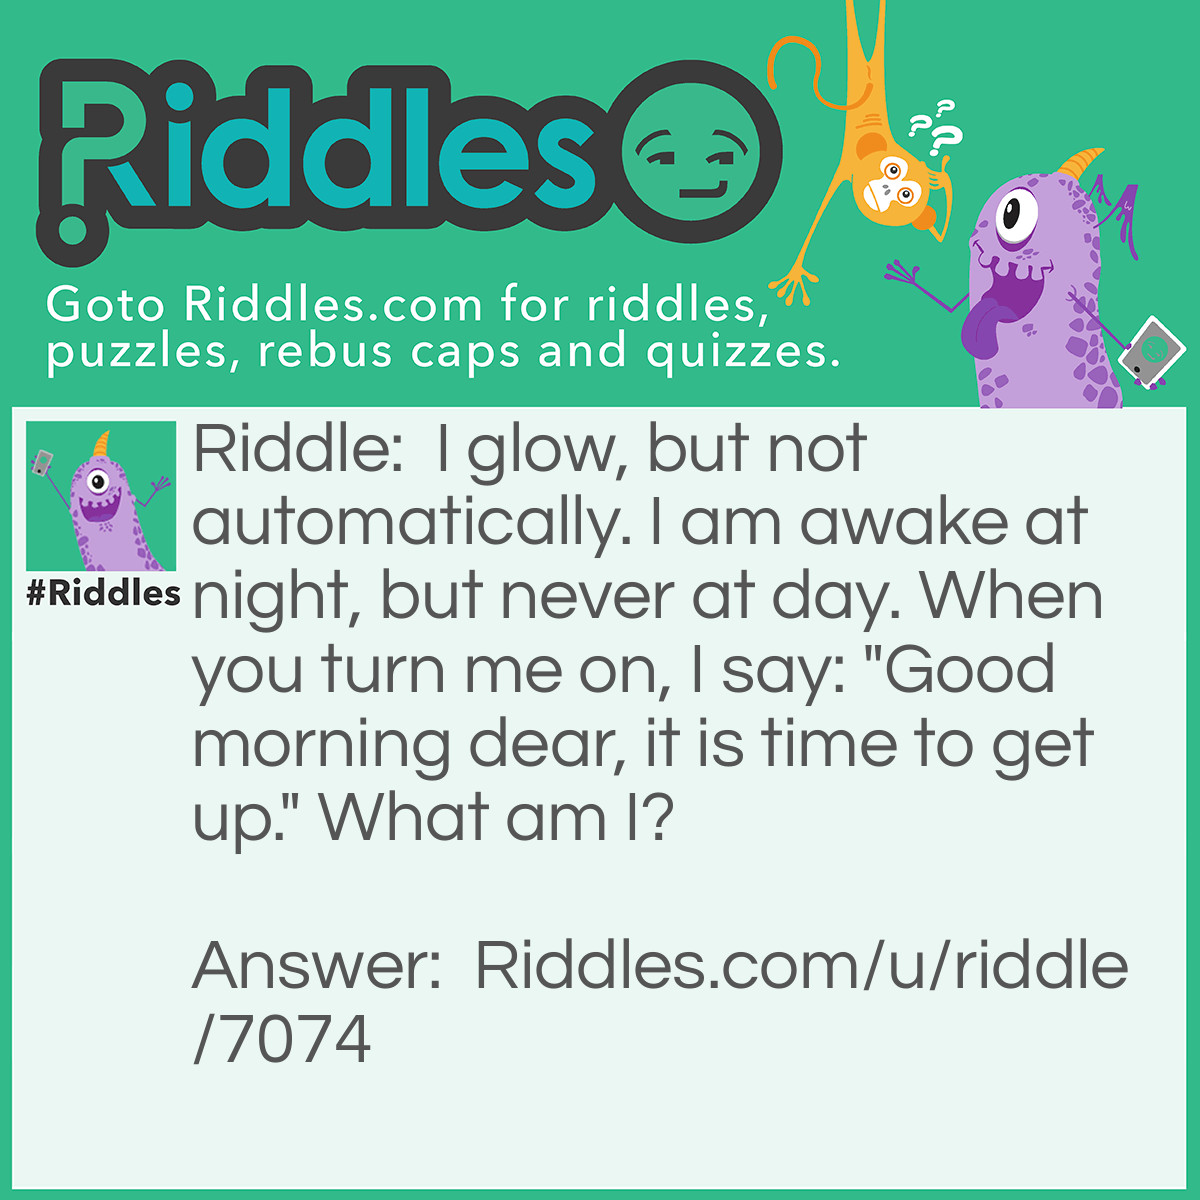 Riddle: I glow, but not automatically. I am awake at night, but never at day. When you turn me on, I say: "Good morning dear, it is time to get up." What am I? Answer: A Lamp.